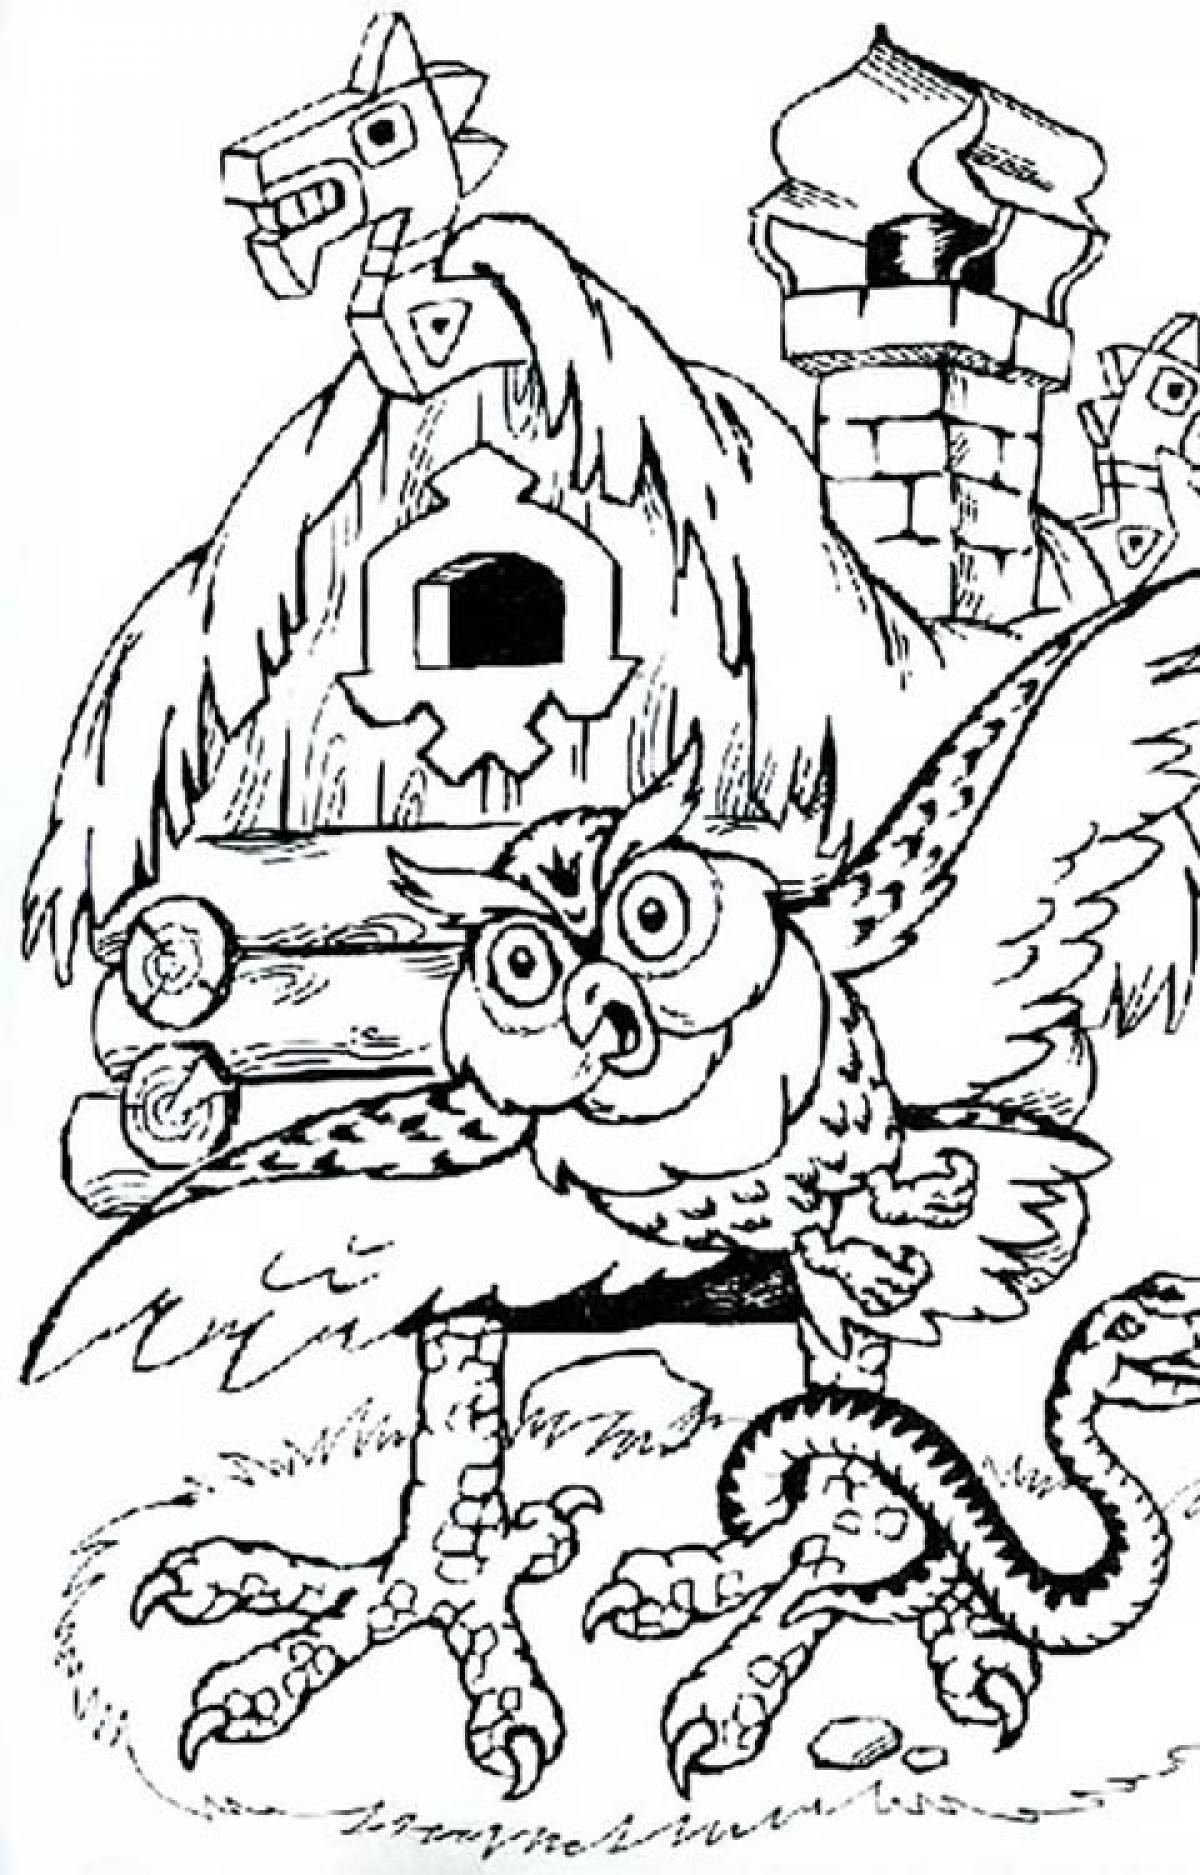 Owl and hut